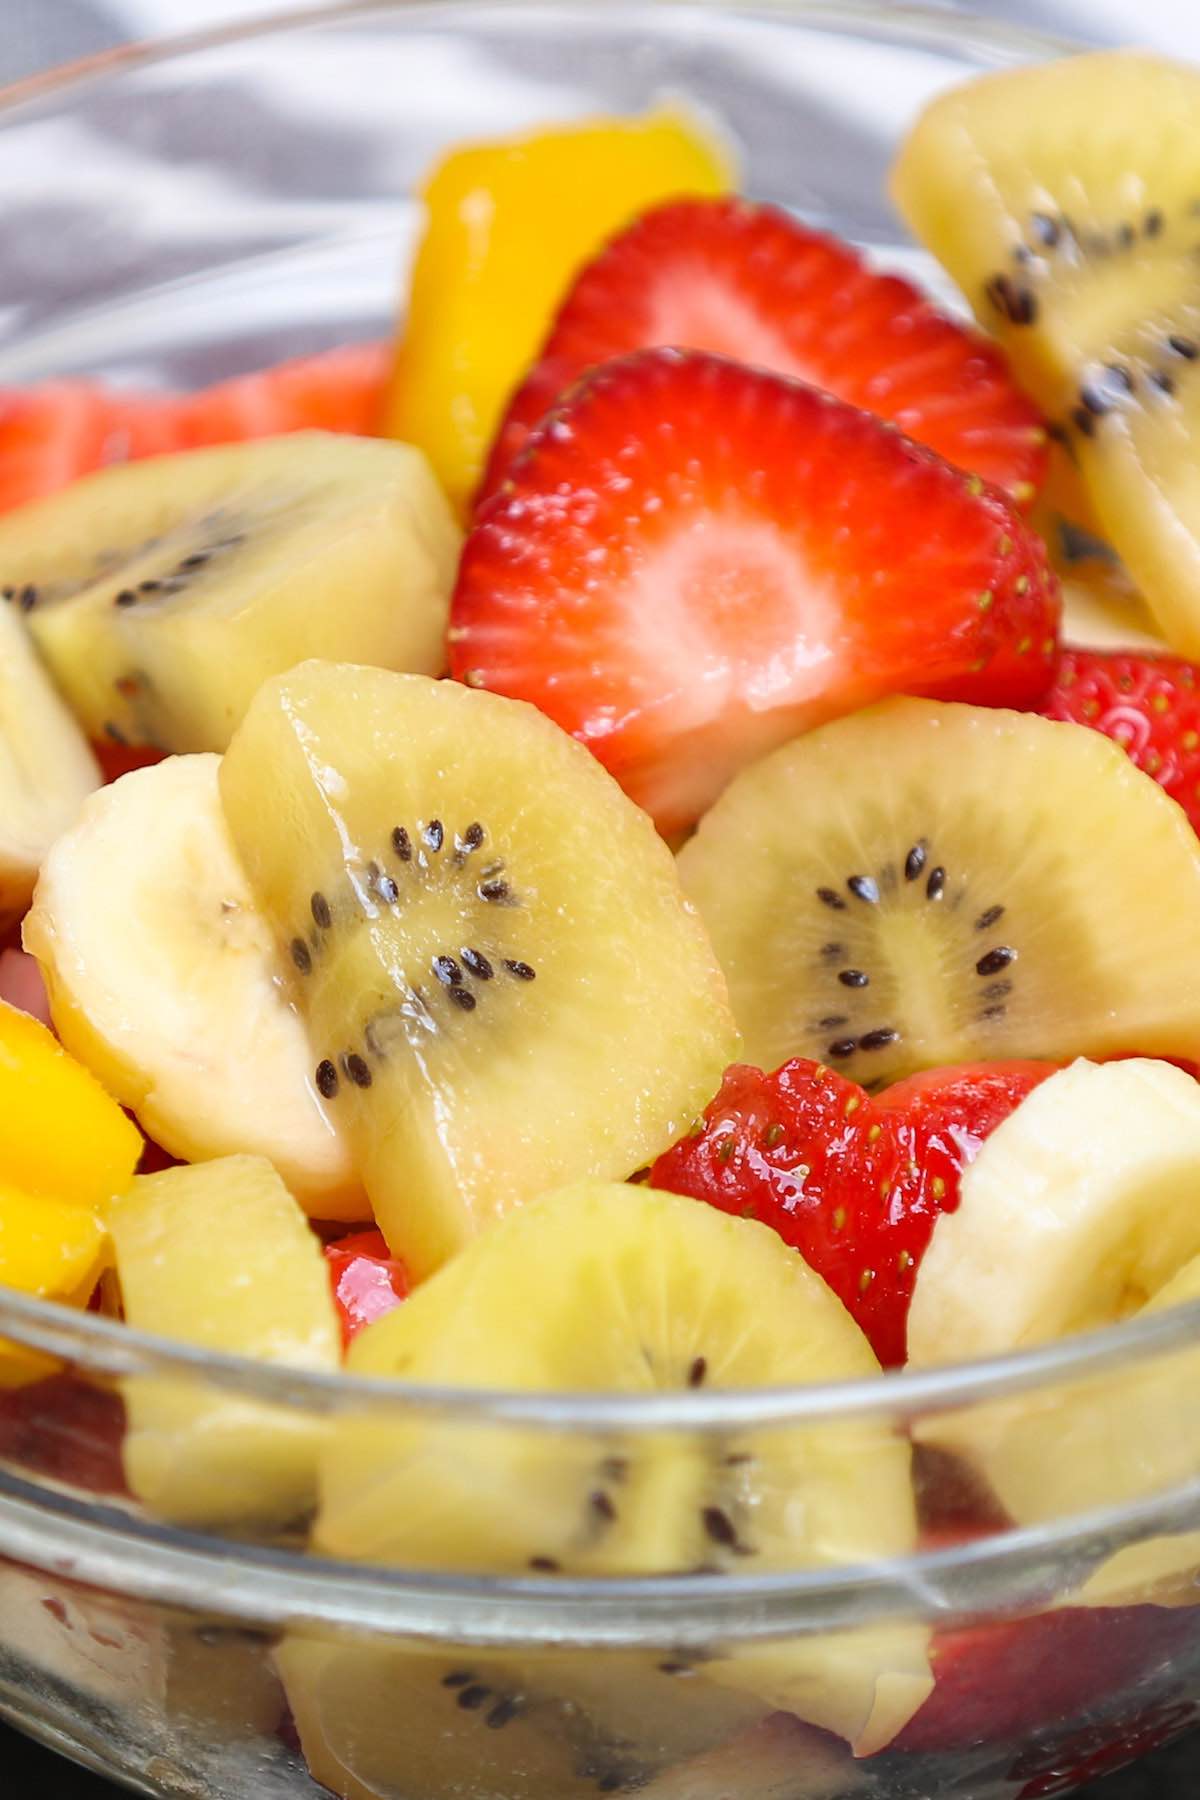 Tropical fruit salad in a serving bowl